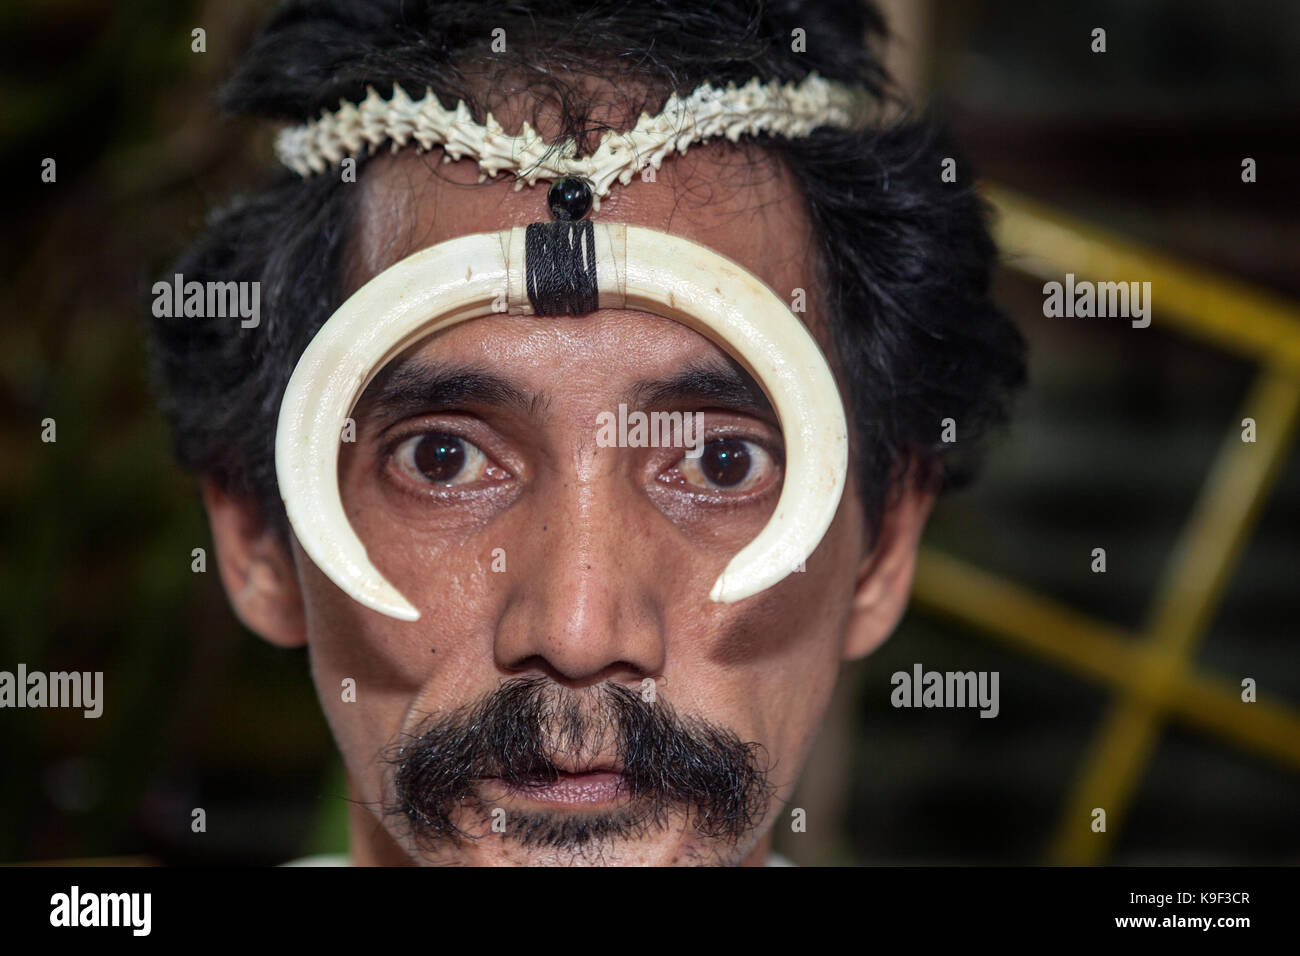 Unusual portrait of an Asian Filipino man who is a bone seller living in Puerto Princesa, Palawan Island, Philippines. Stock Photo